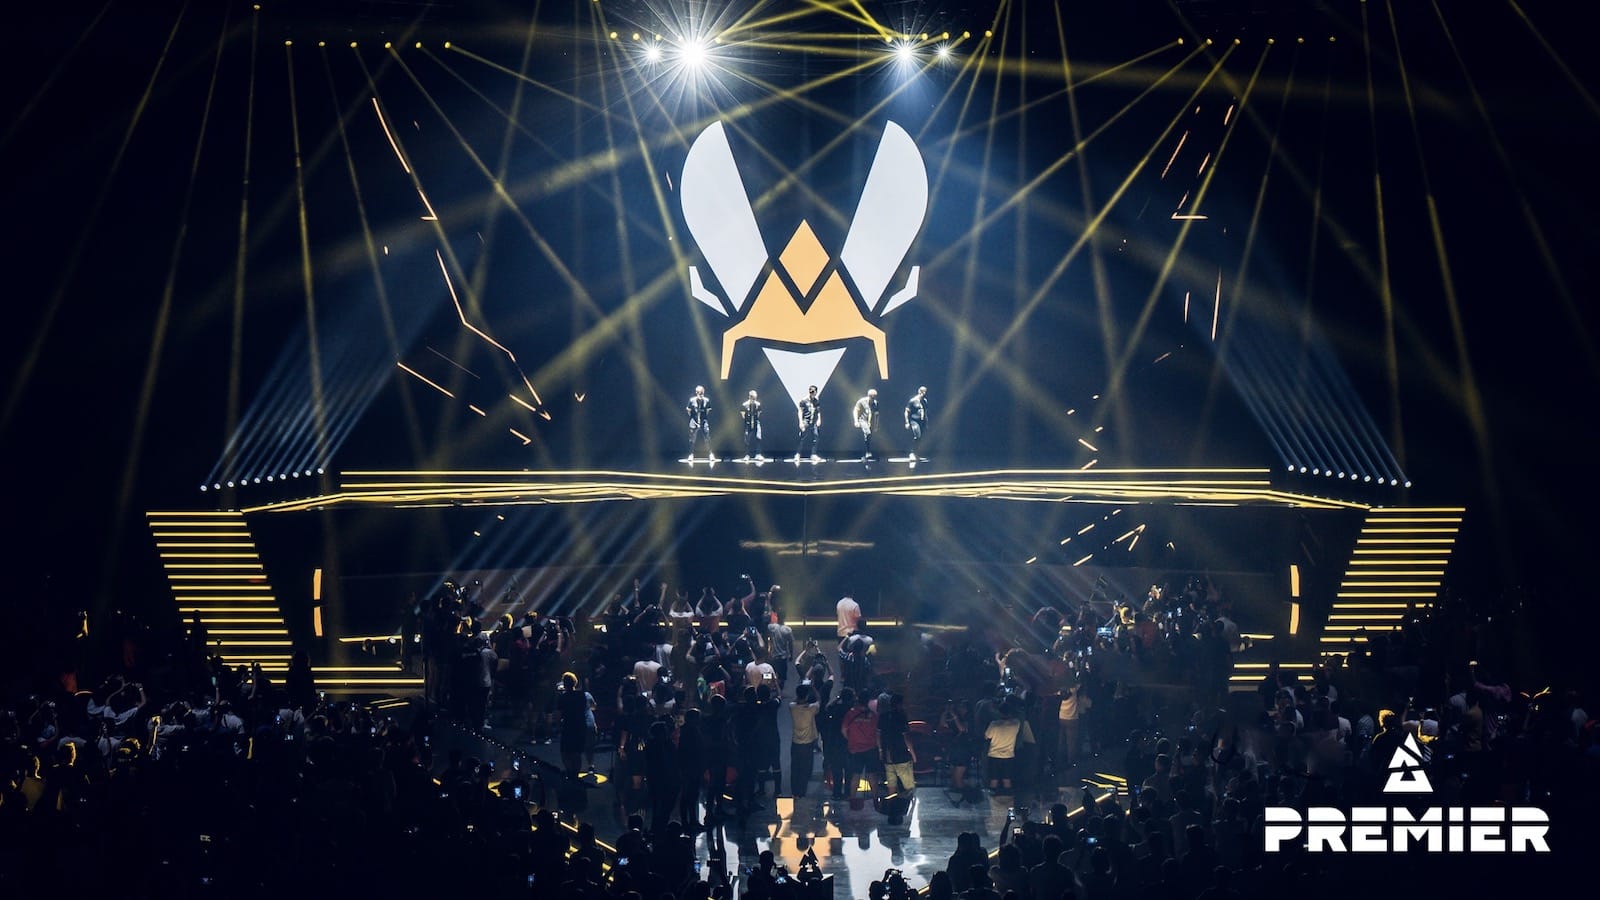 Sources: Vitality accepted into Valorant Partnership Program